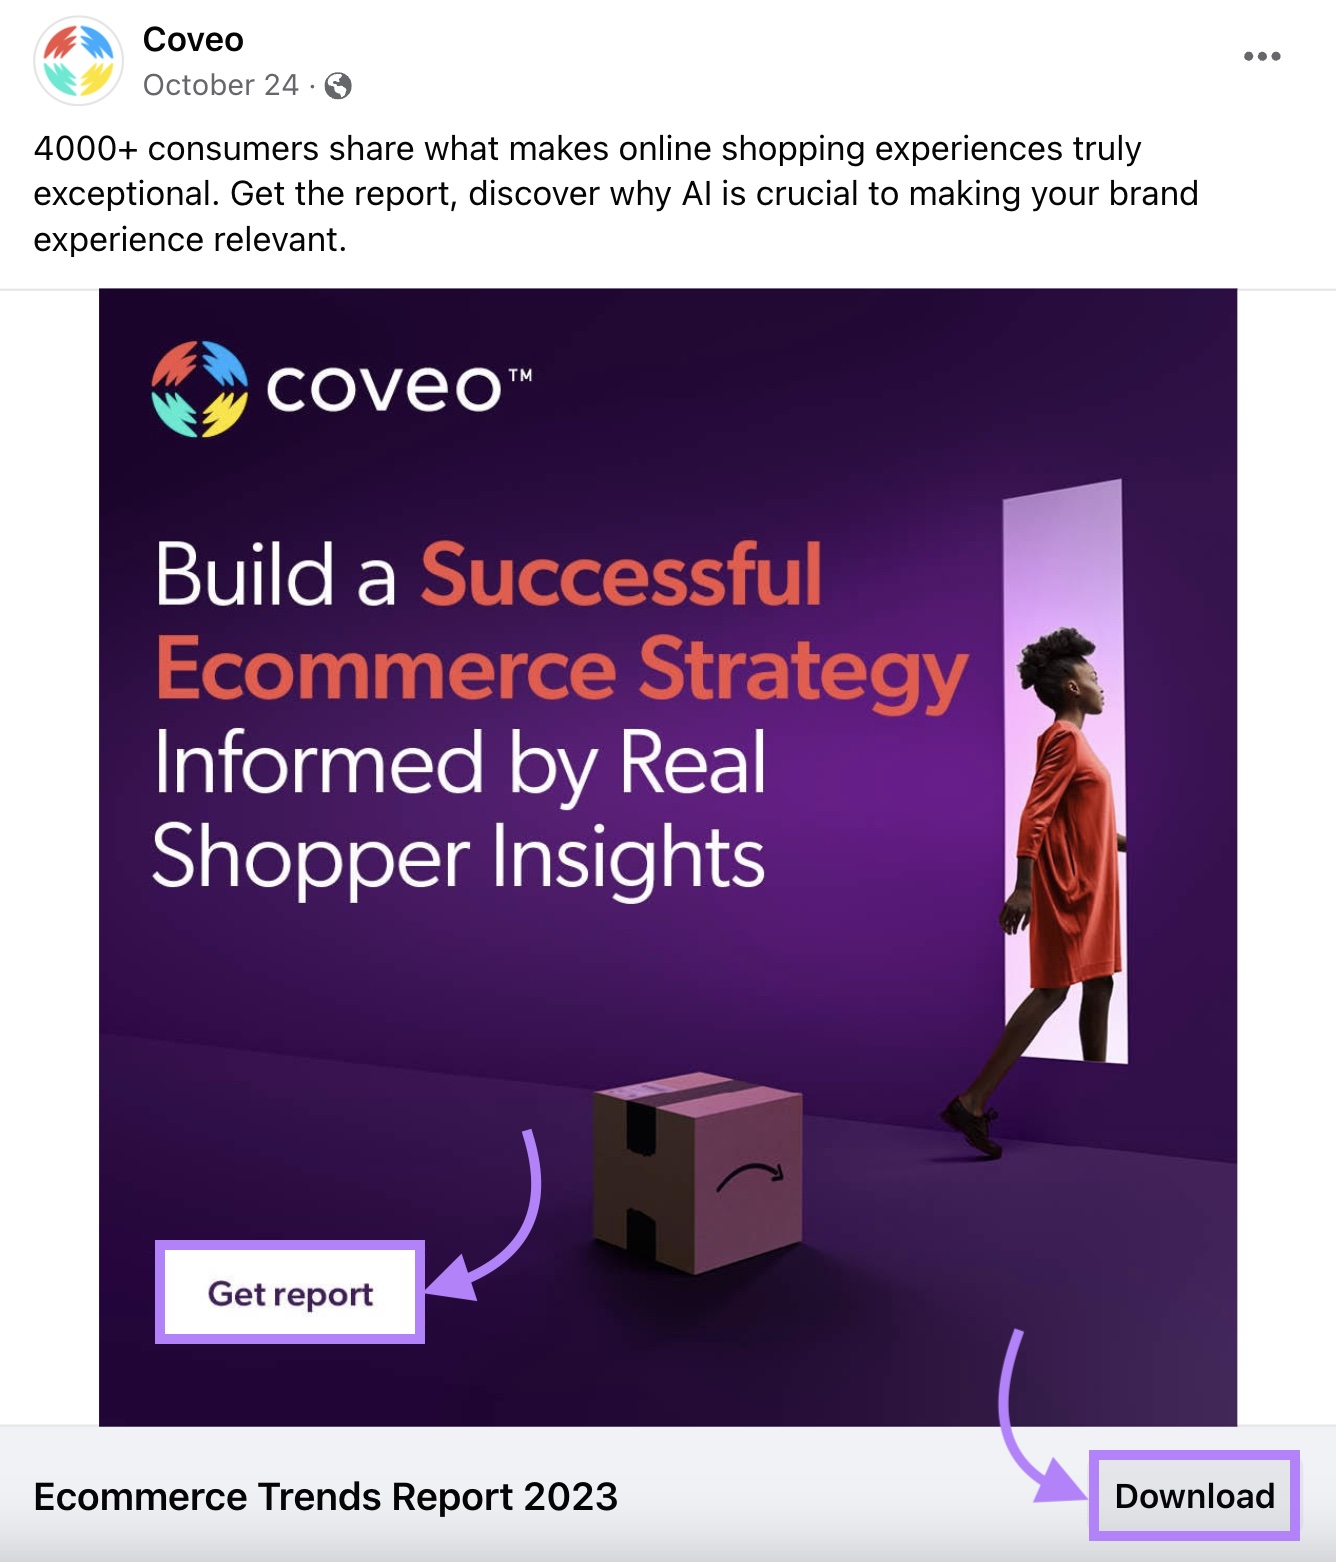 "Get report," and "Download" CTAs highlighted in Coveo's Facebook ad